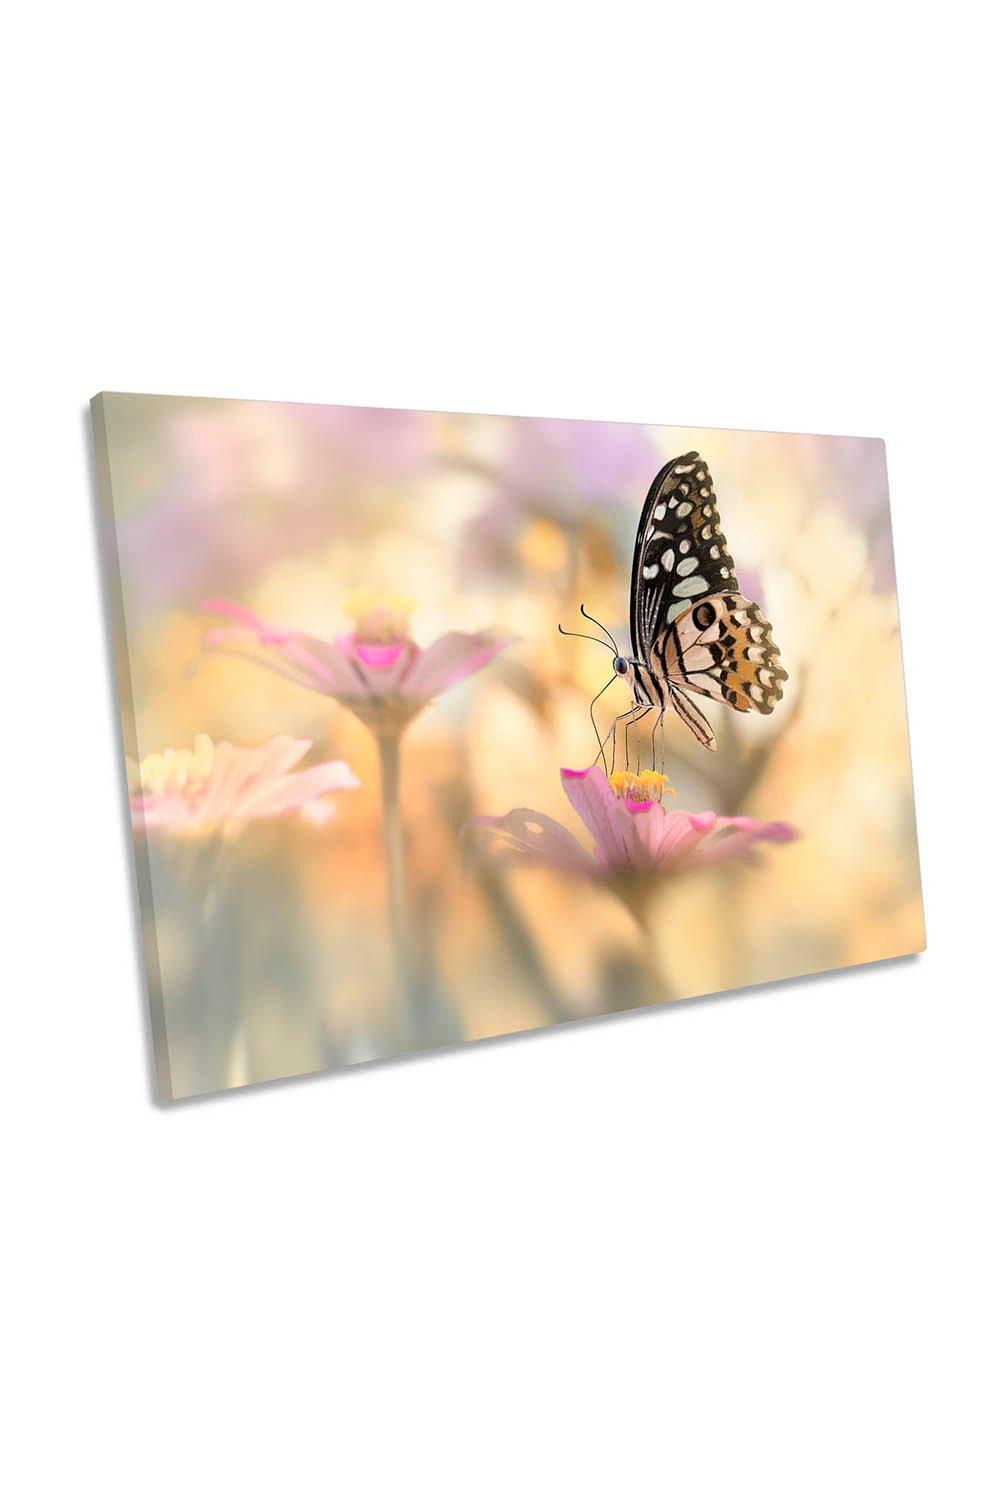 Morning Dance Butterfly Flower Canvas Wall Art Picture Print